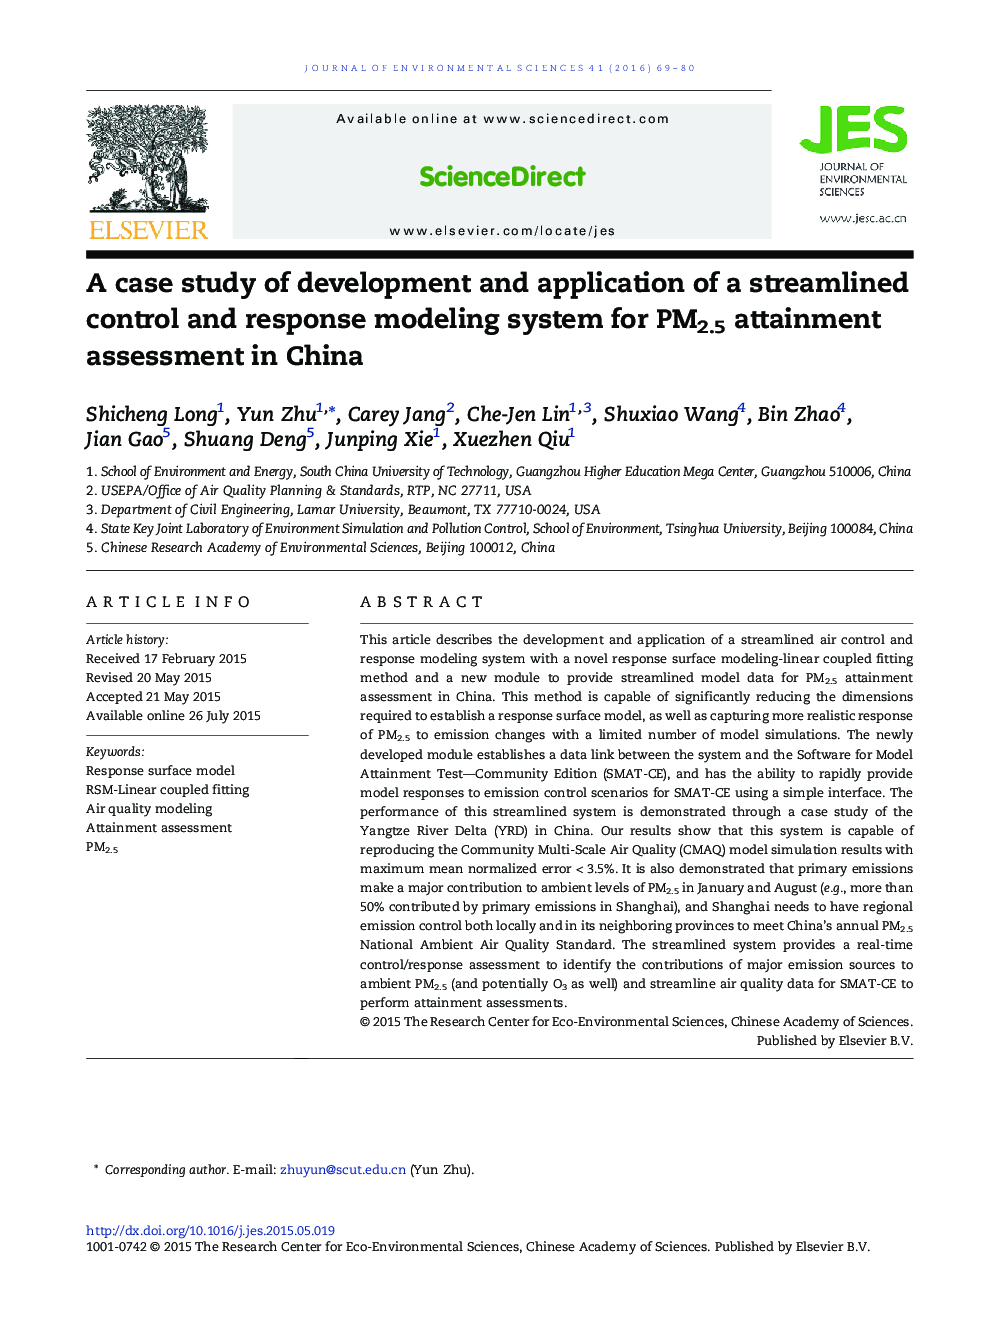 A case study of development and application of a streamlined control and response modeling system for PM2.5 attainment assessment in China